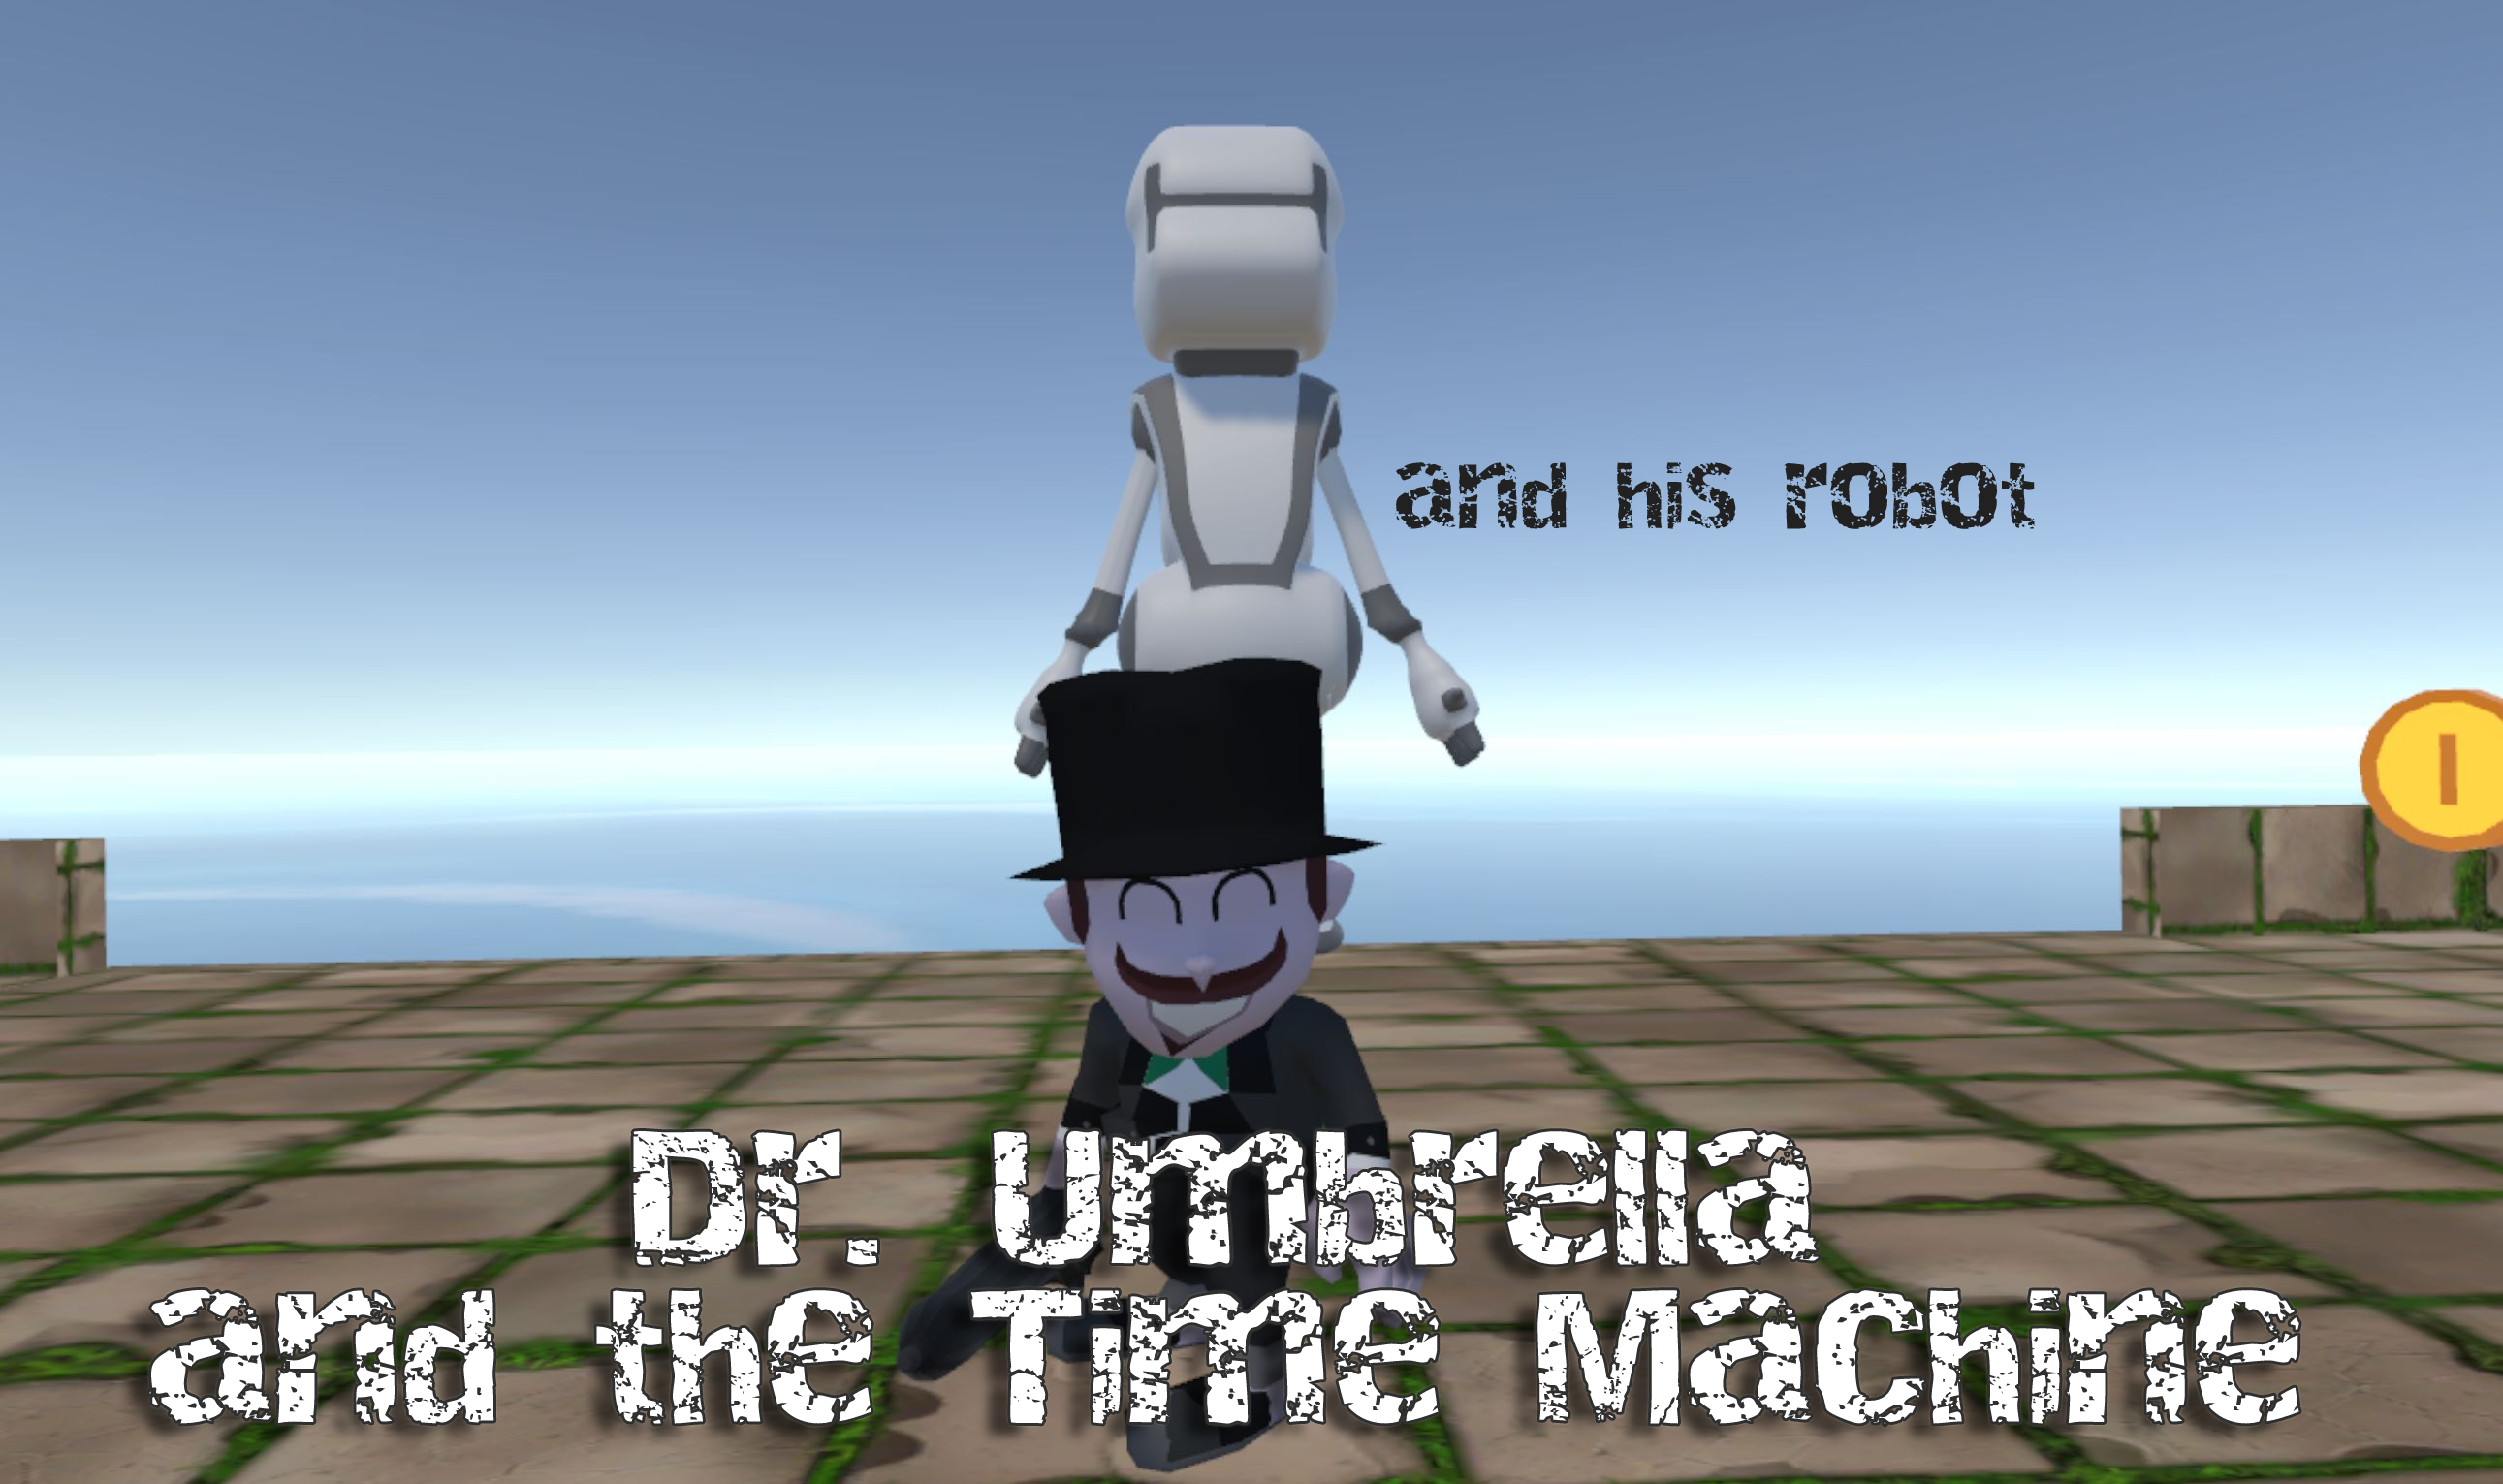 Dr. Umbrella (and his robot) in the Time Machine